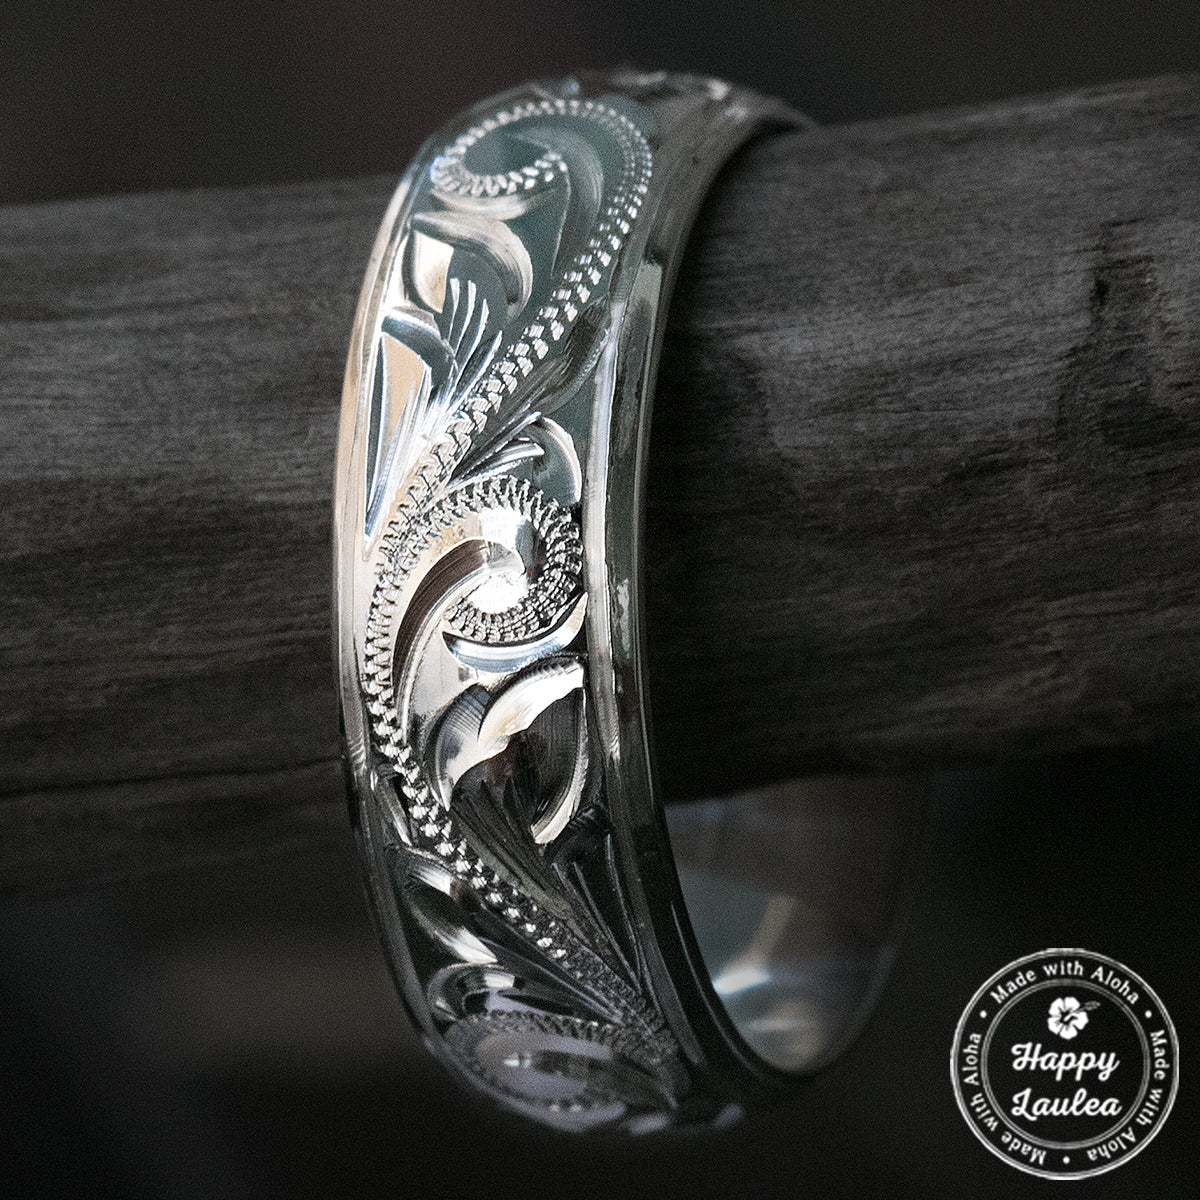 925 Stering Silver Ring Hand Engraved Old English Design with Polished Edges - 6mm-8mm, Dome Barrel, Standard Fitment